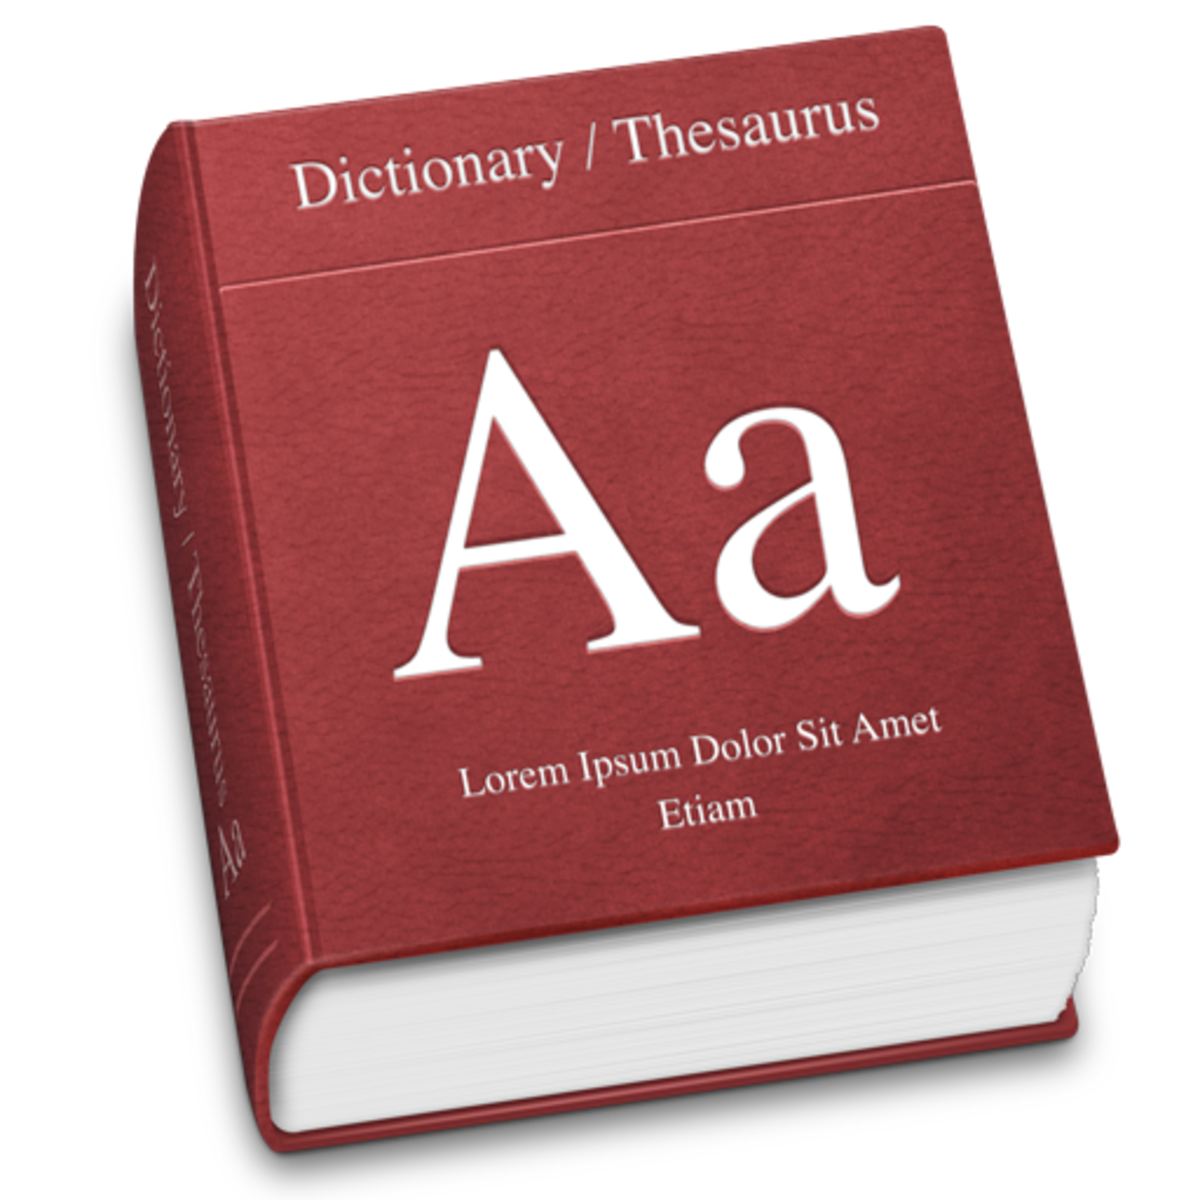 The Importance of a Good Dictionary